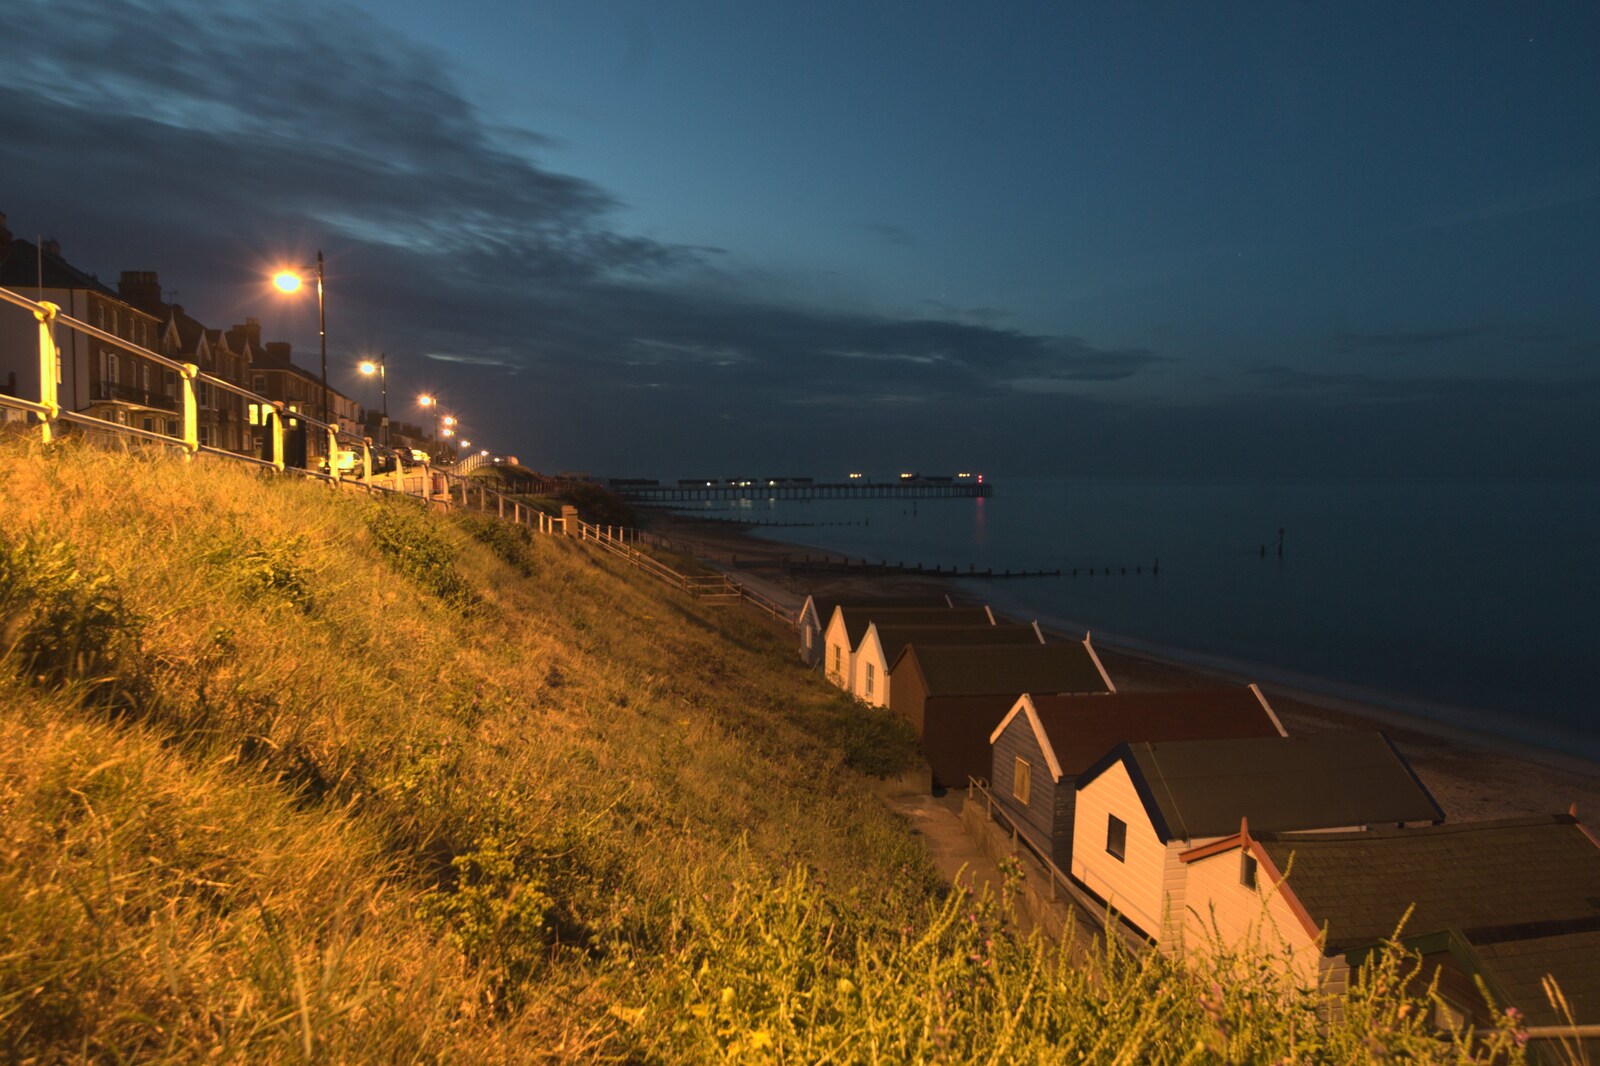 The seafront at night, with the pier in the distance from A "Minimoon" and an Adnams Brewery Trip, Southwold, Suffolk - 7th July 2010